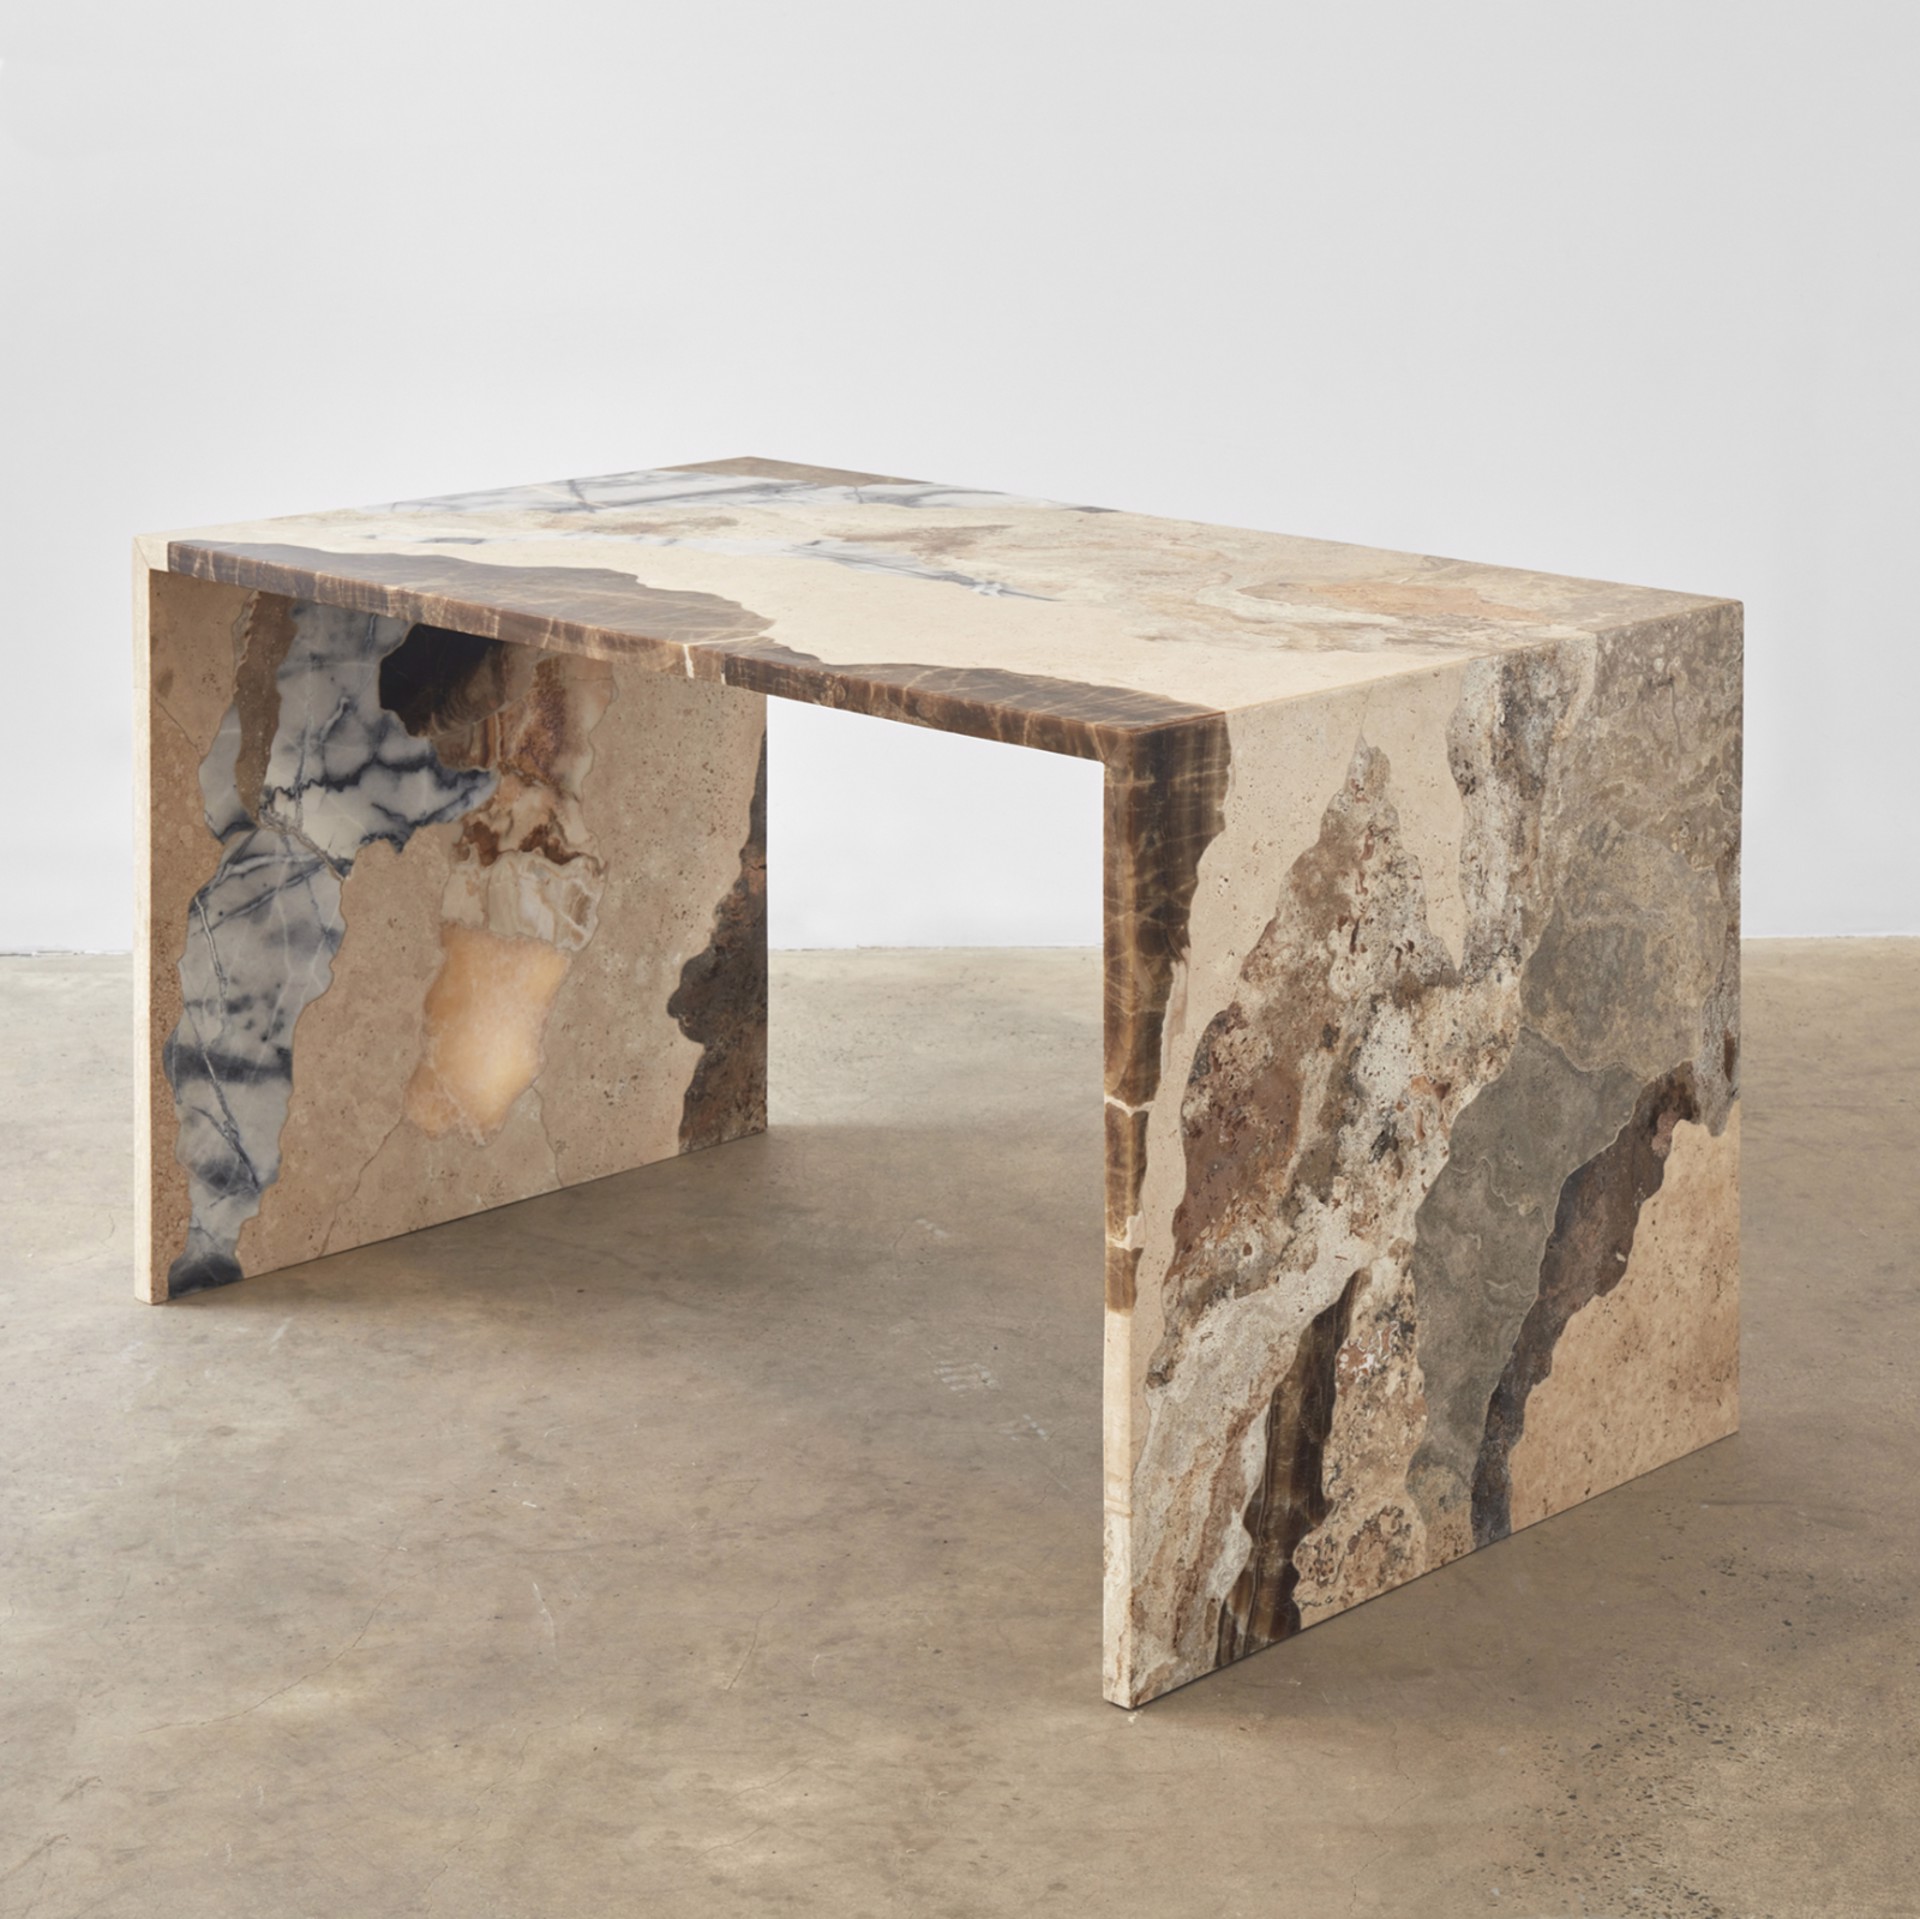 HAND CARVED STONE TABLE: SOIL MAP NO. 1 by Rafael Freyre Studio